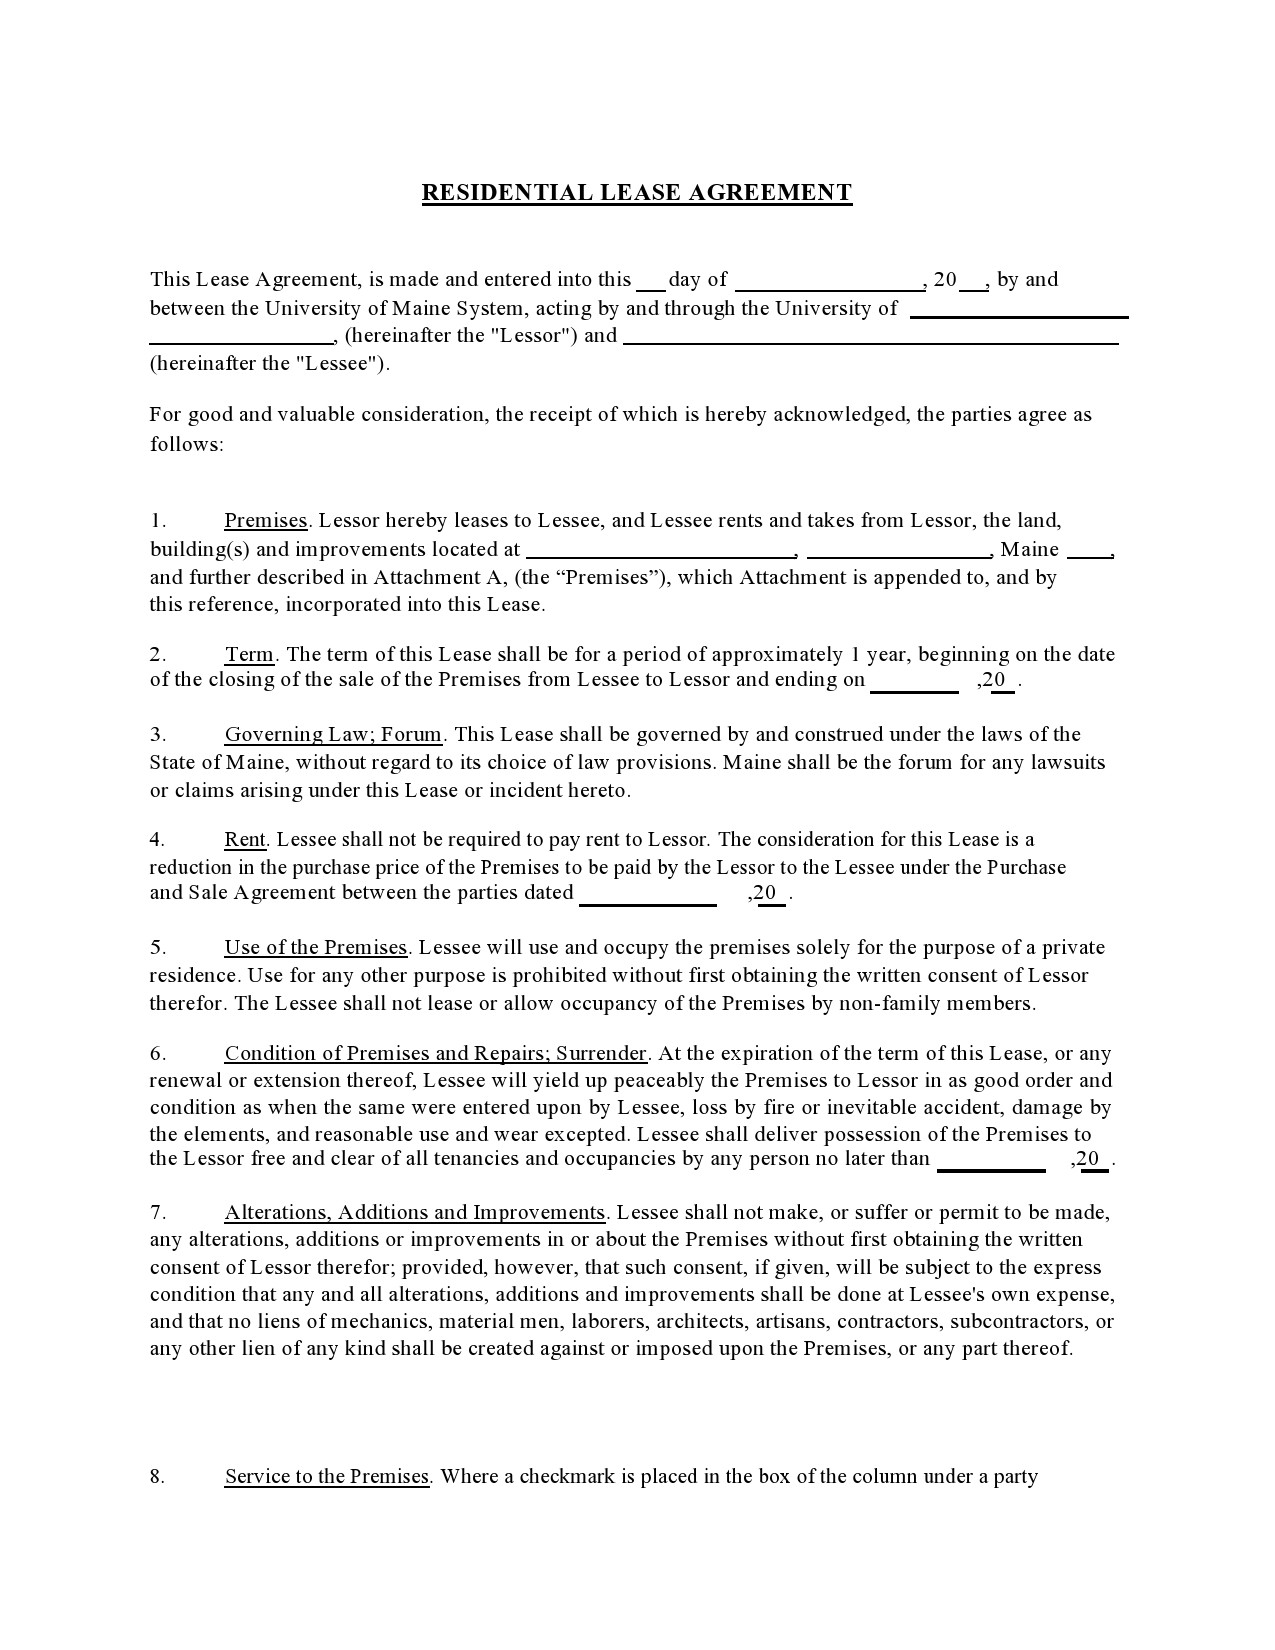 Free residential lease agreement 33